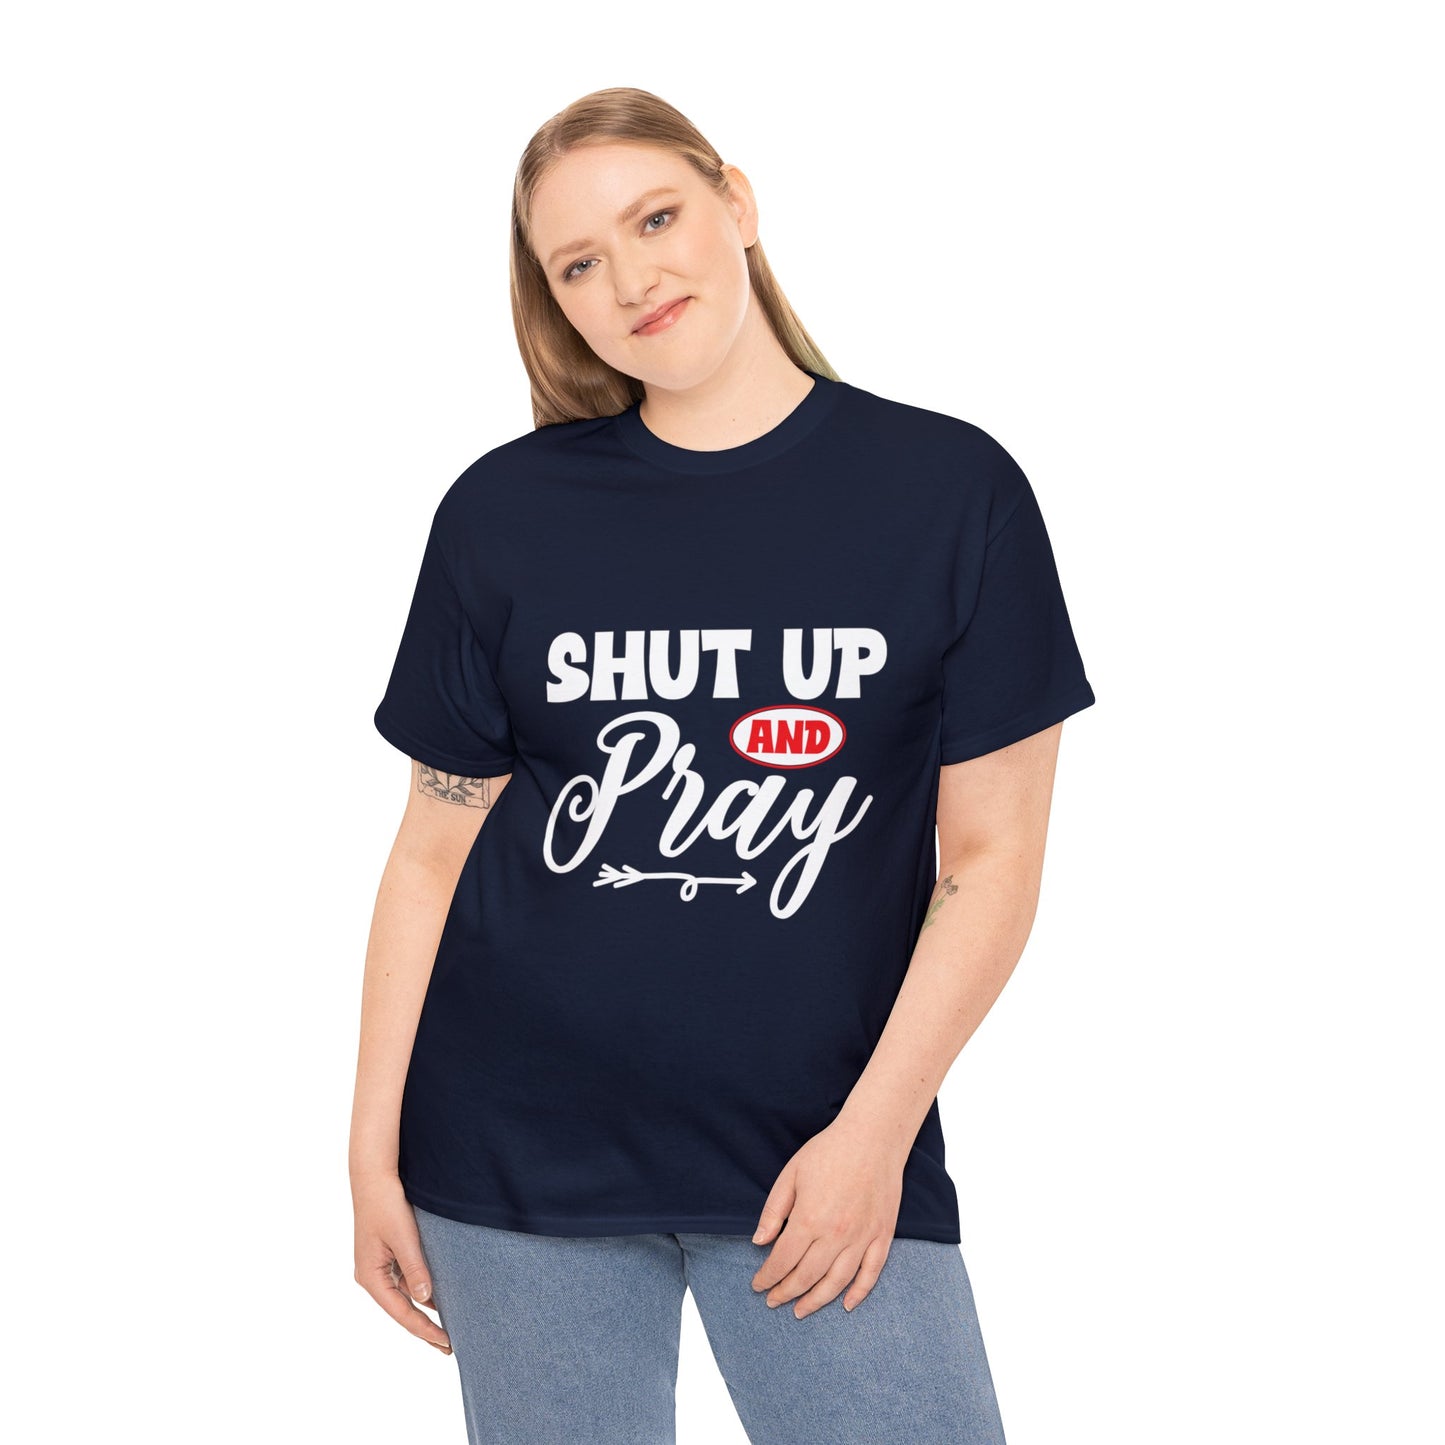 "Shut Up & Pray" T-Shirt - Weave Got Gifts - Unique Gifts You Won’t Find Anywhere Else!